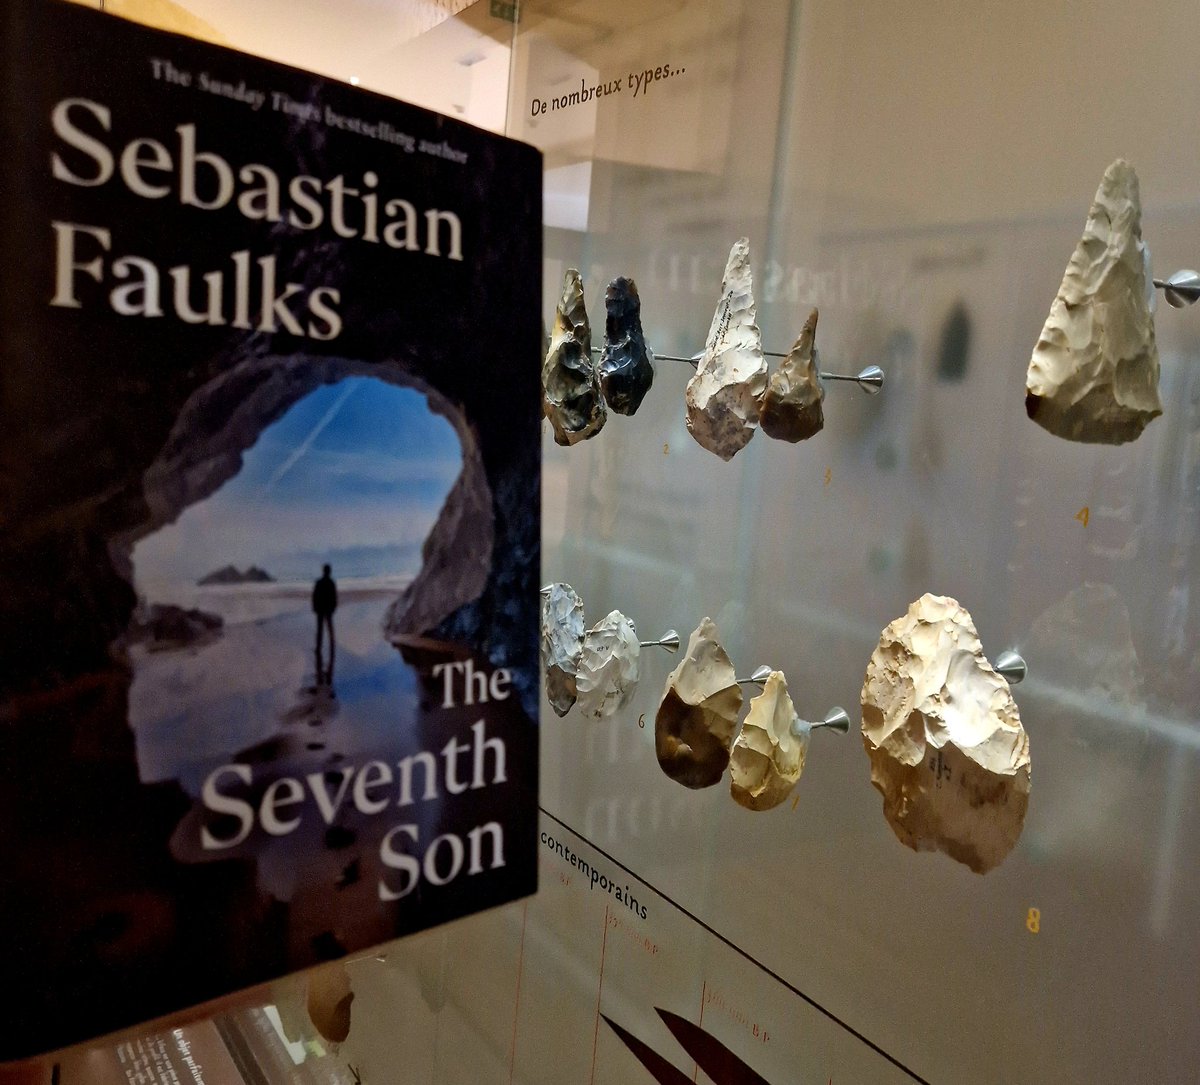 Taking @SebastianFaulks' new book #TheSeventhSon on a little pre-publication tour, encountering some special protagonists from prehistory 💀🧬👀